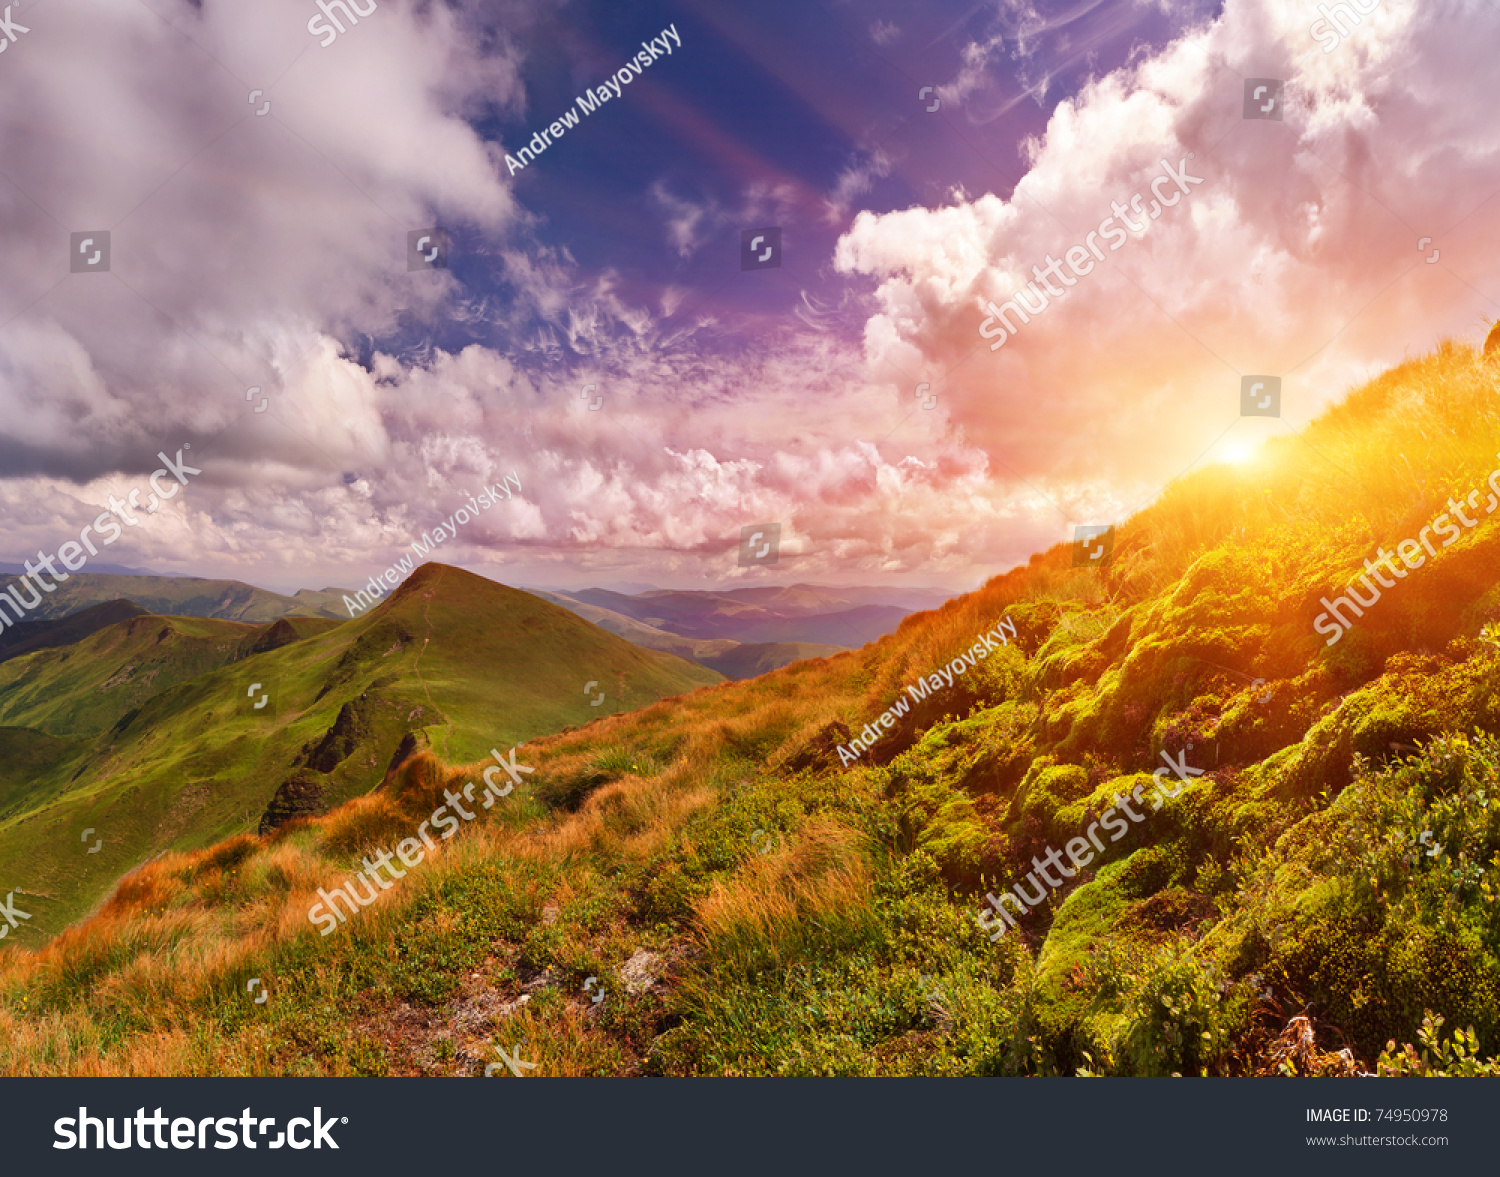 Summer landscape in the mountains. Sunset #74950978